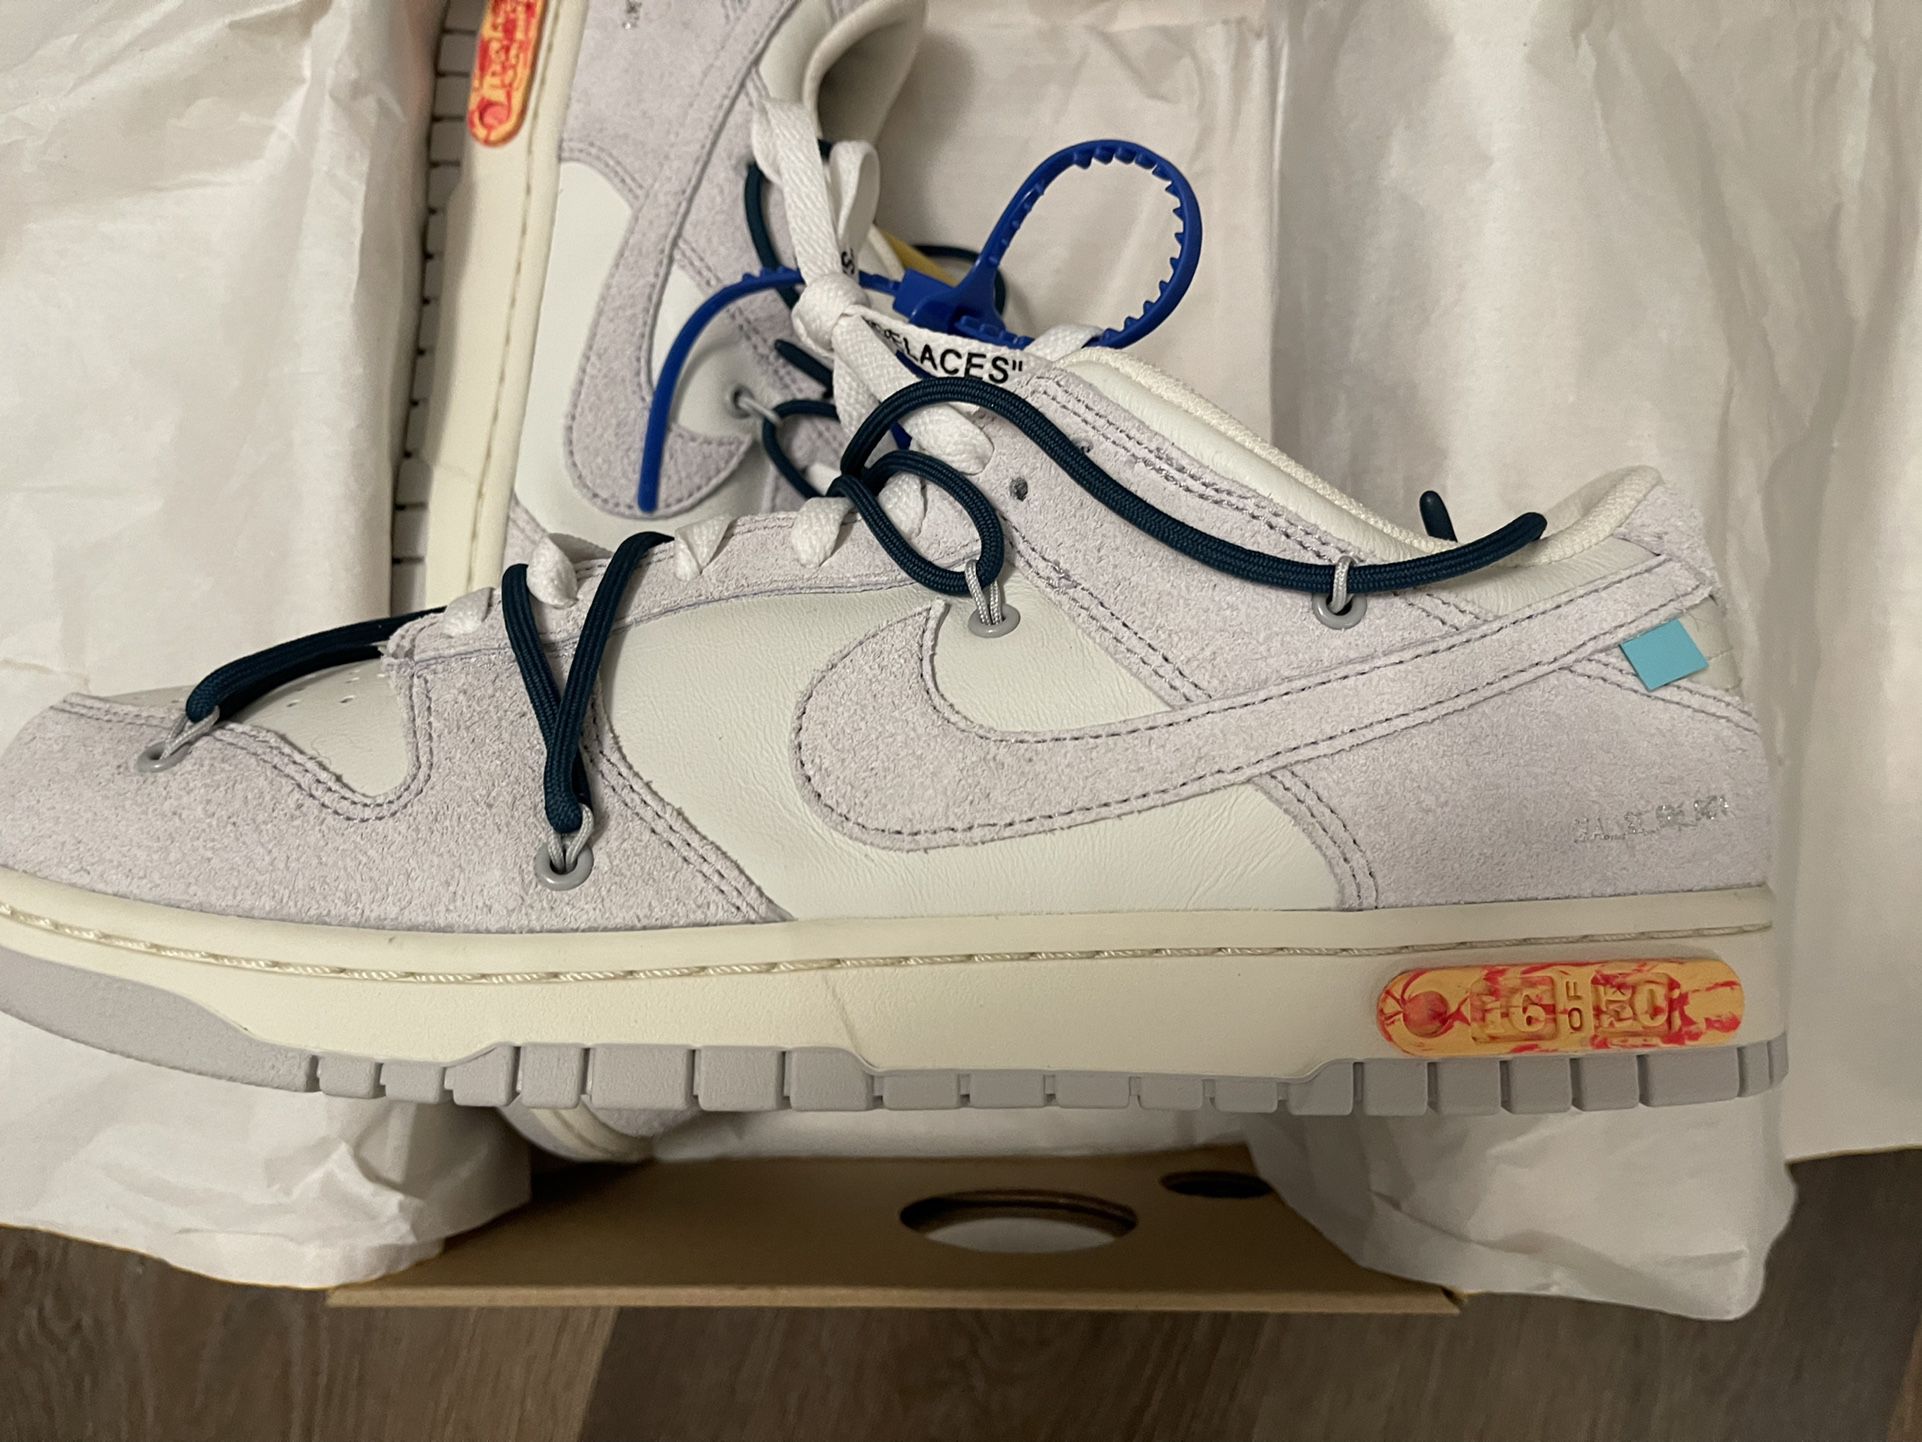 Oversigt godkende Opaque Nike Dunk Low Off White Lot 16 for Sale in Saint Aug Beach, FL - OfferUp